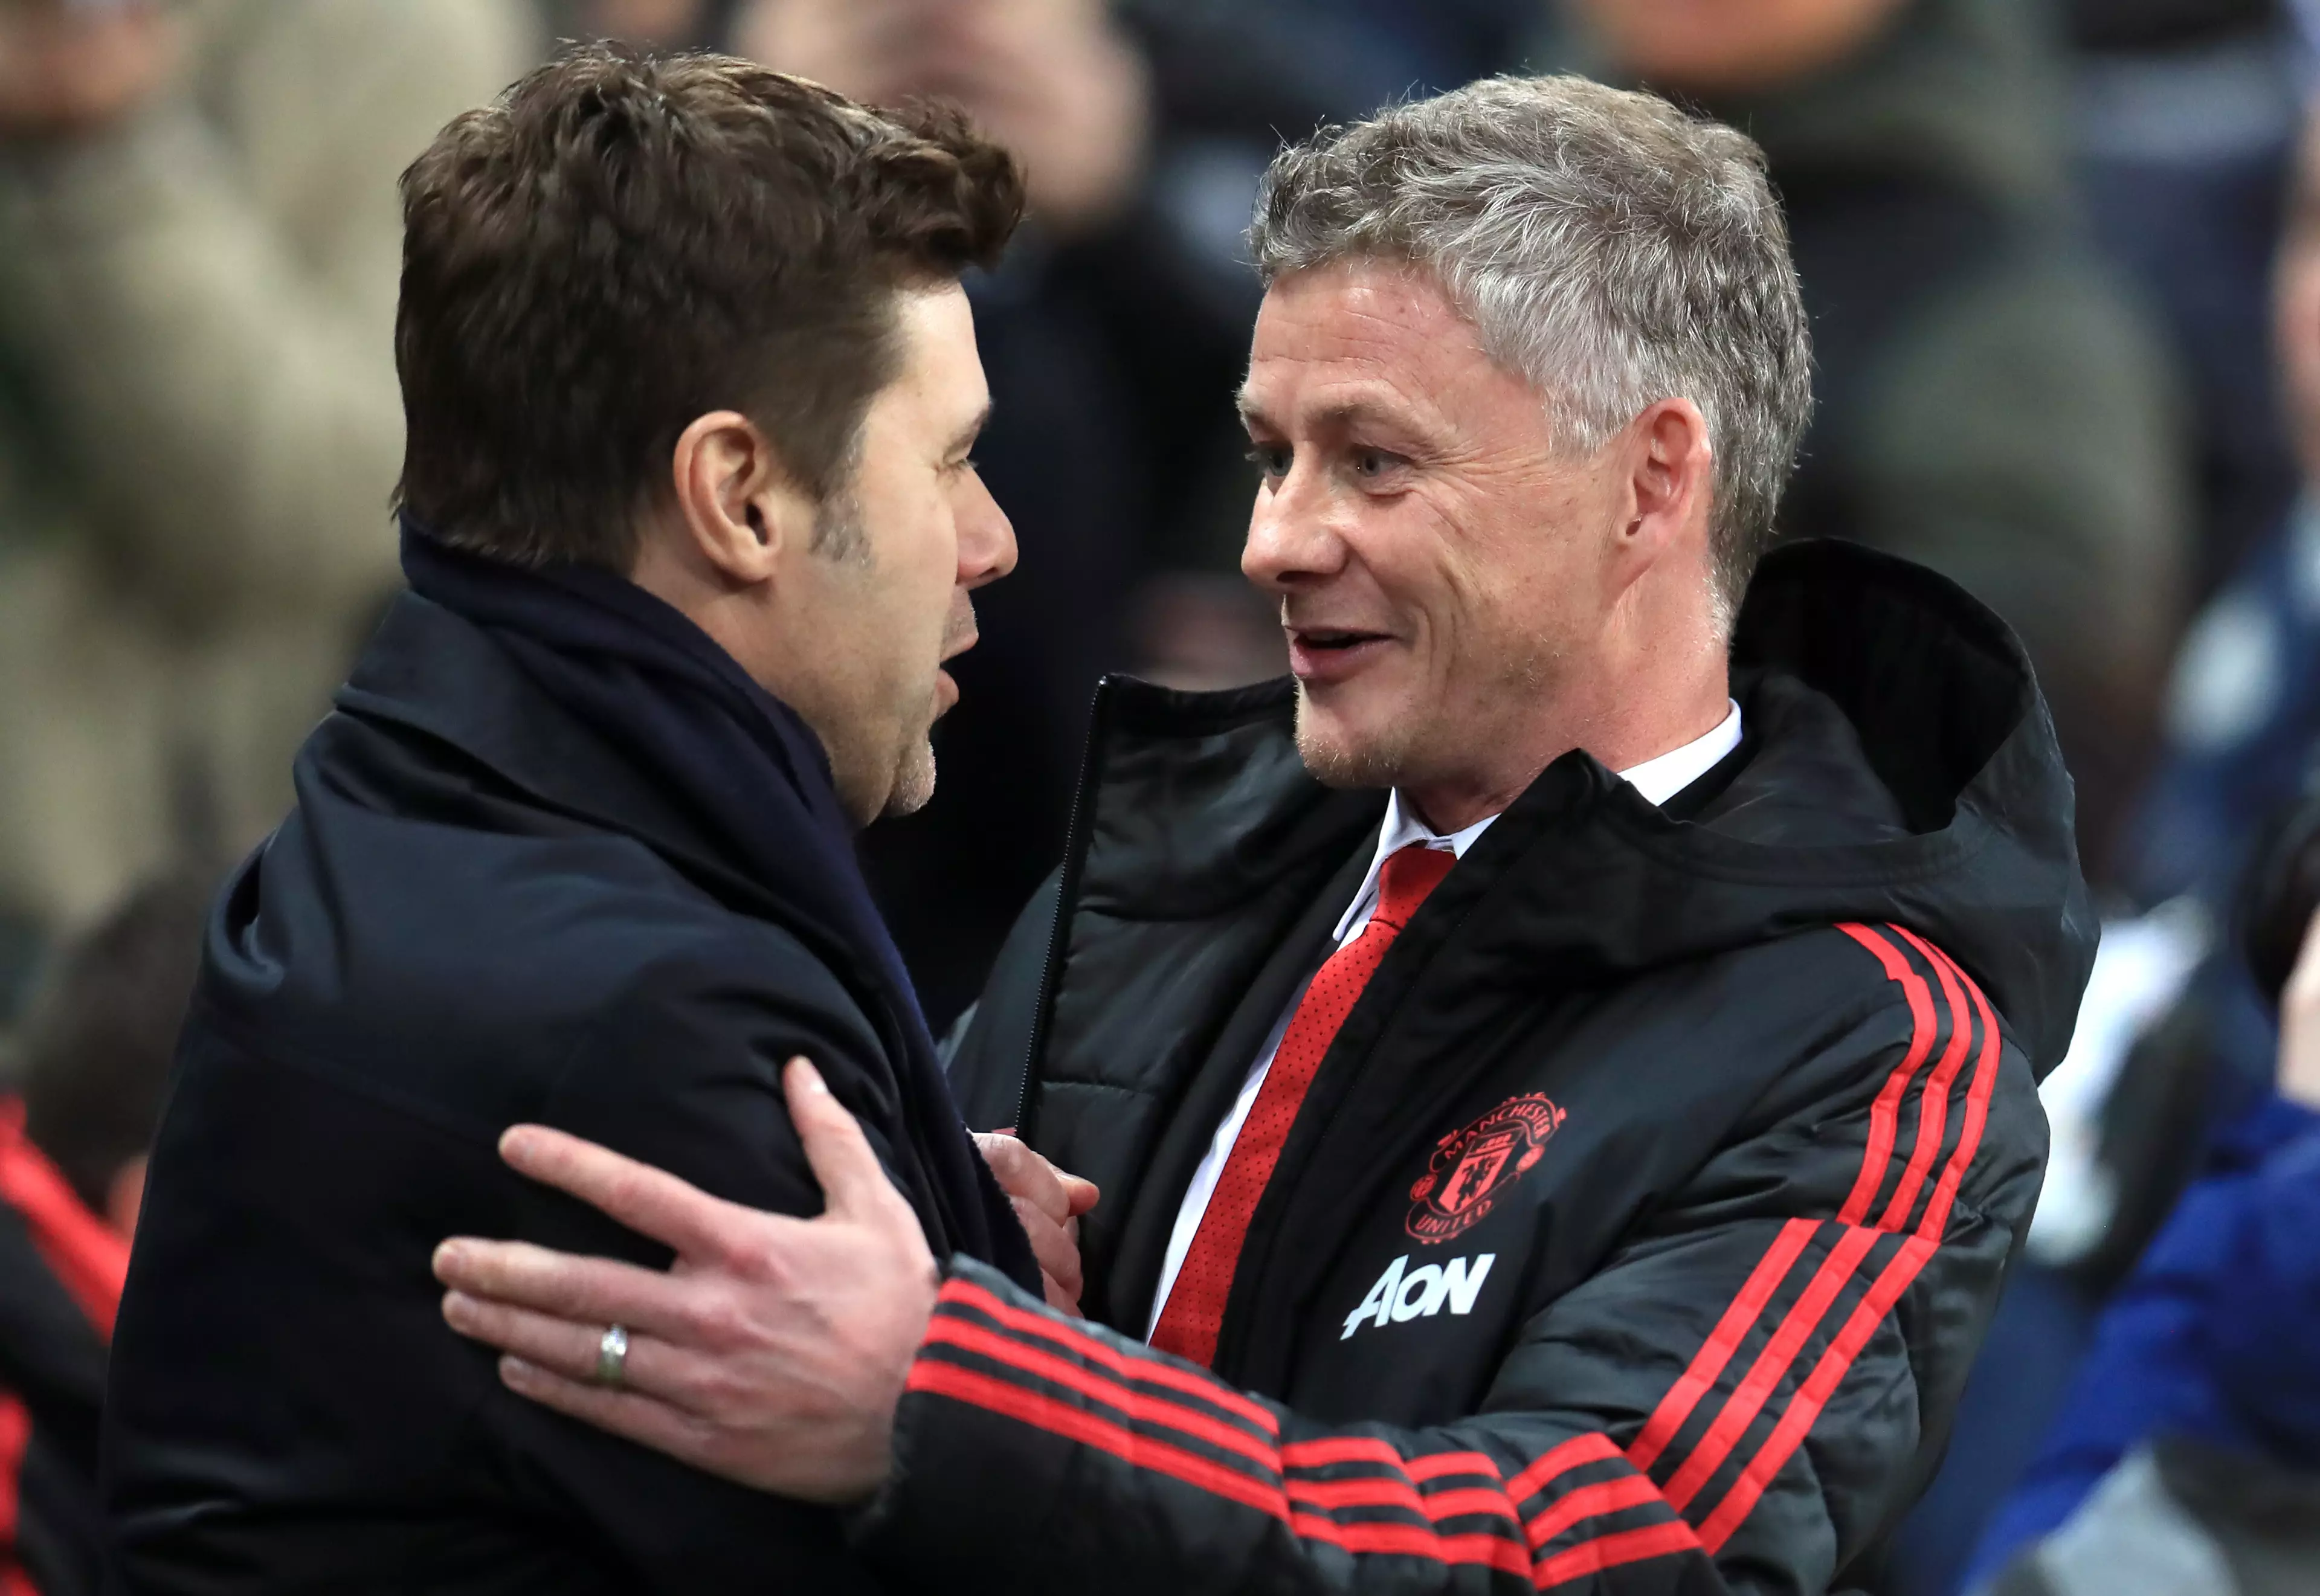 Solskjaer got the better of the pairs recent meeting. Image: PA Images